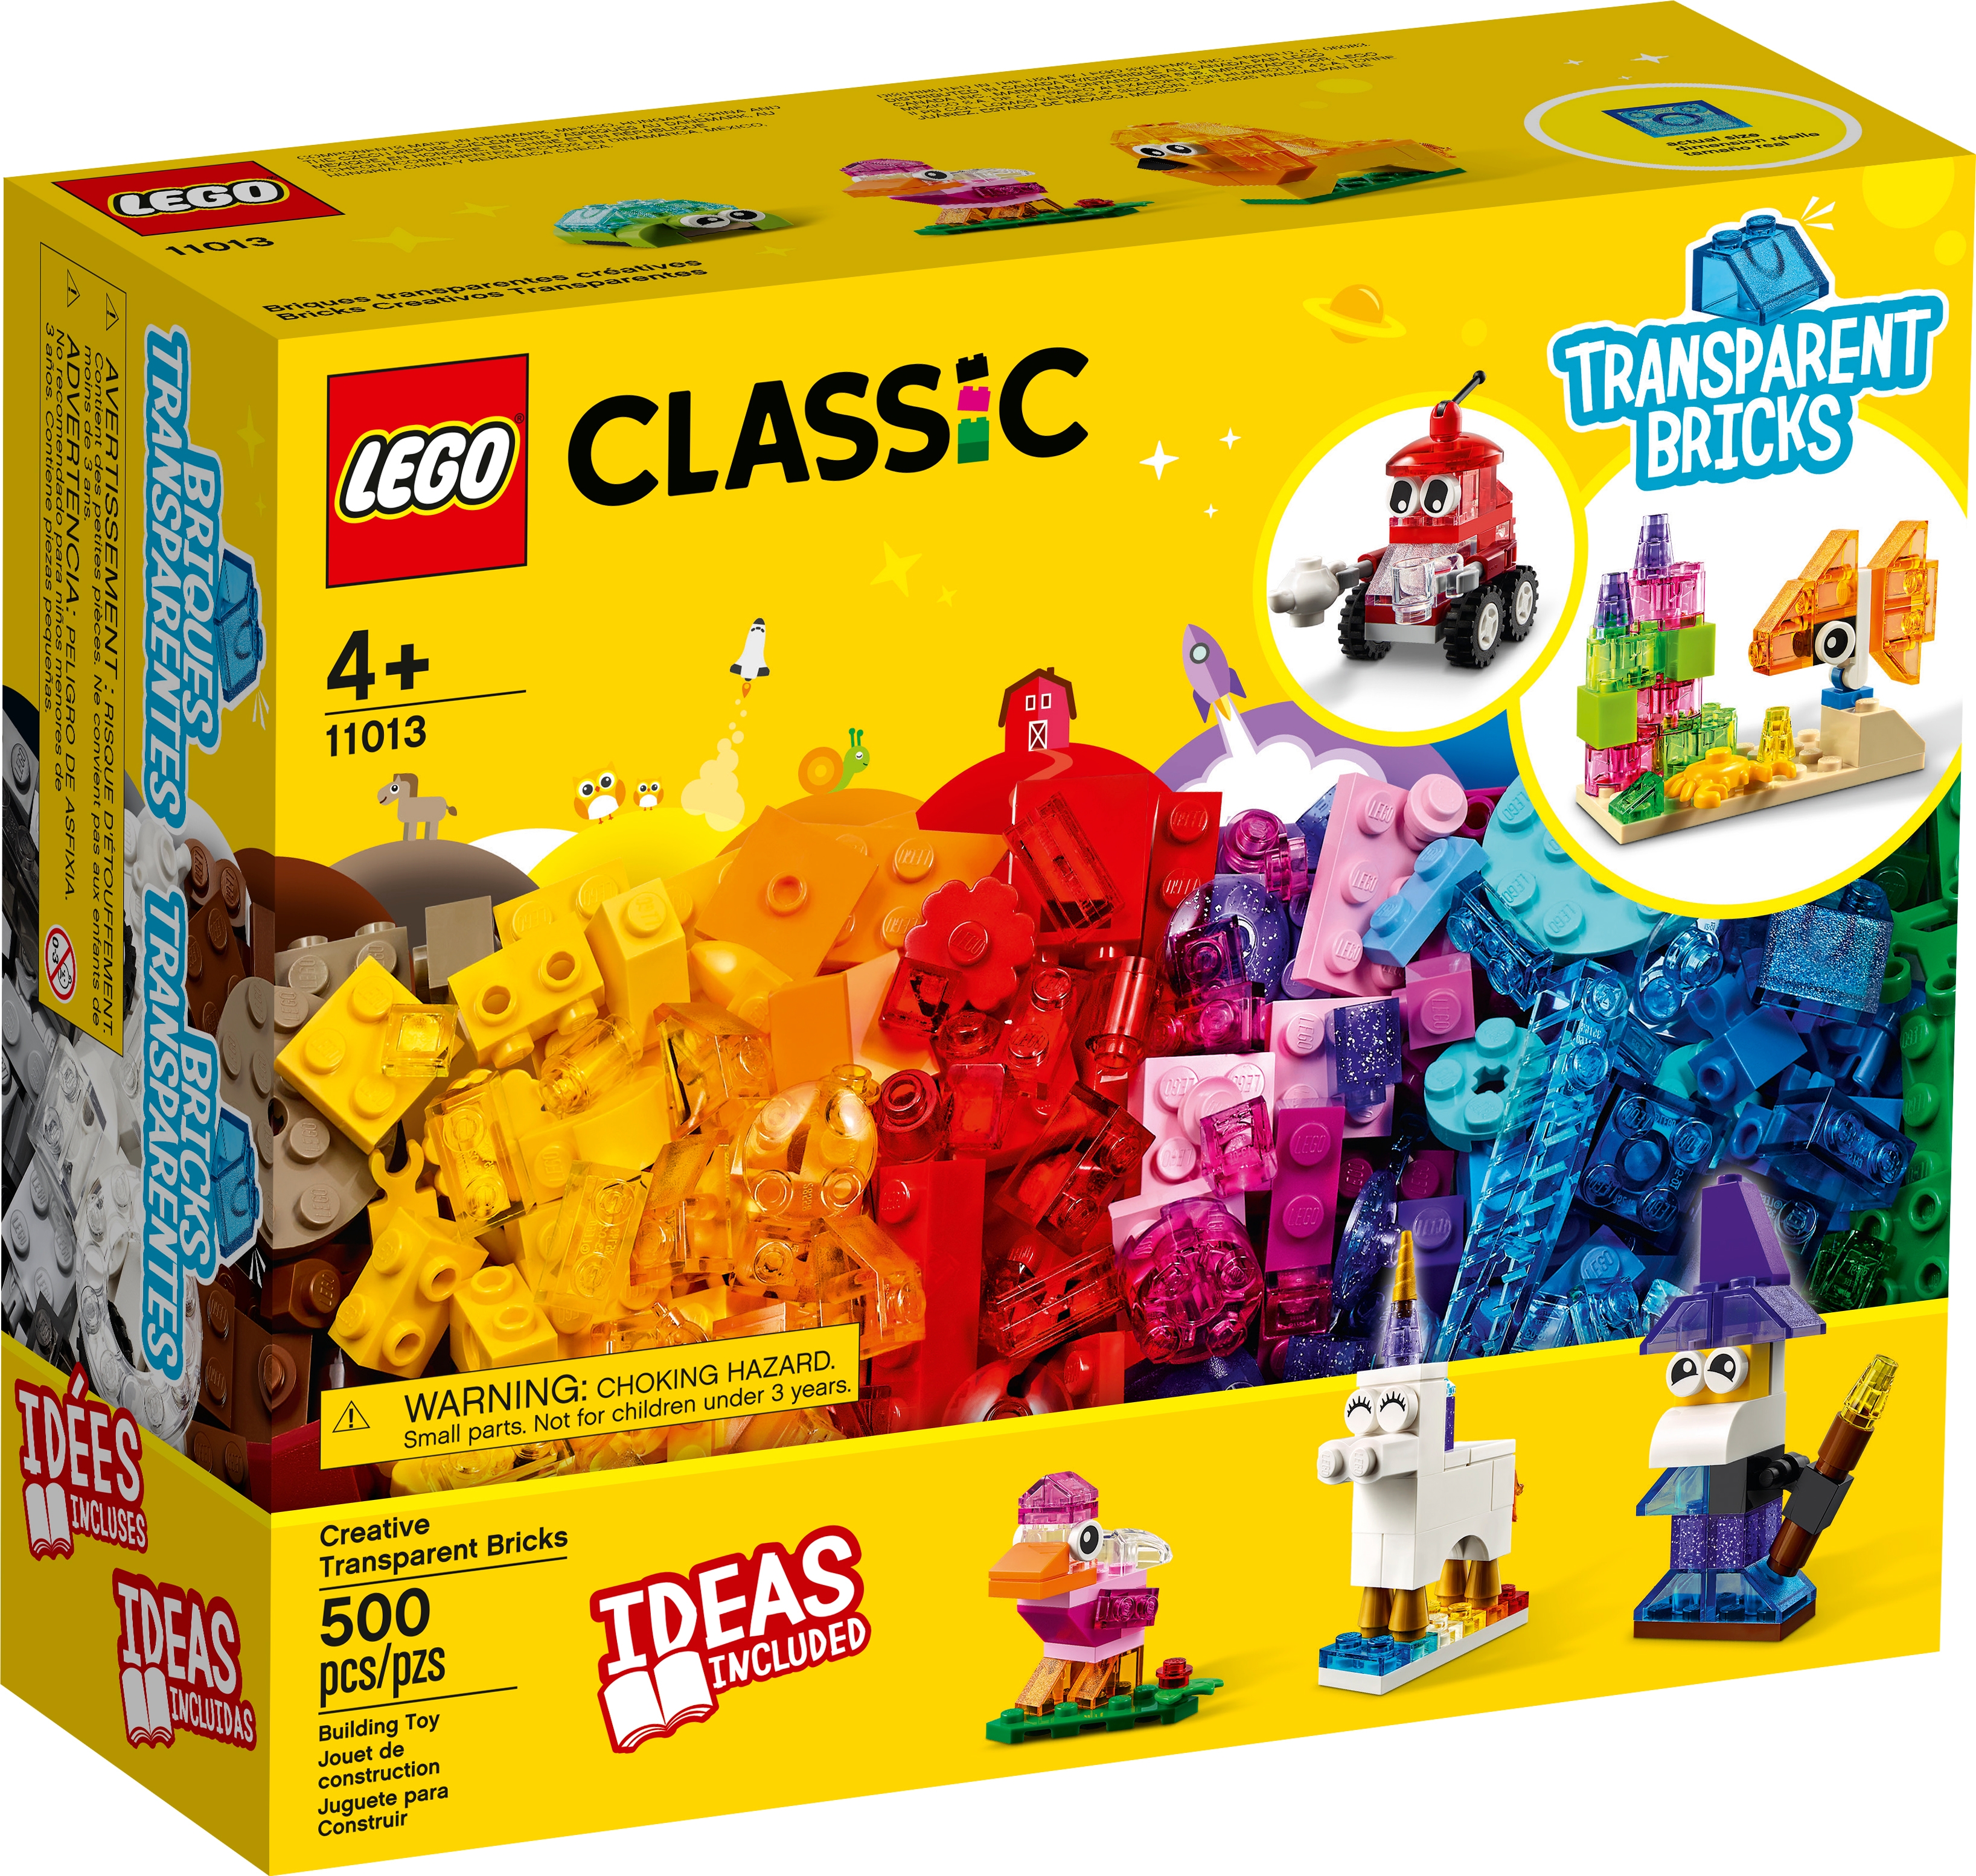 Julia's 7th Birthday Gifts: LEGO Friends | Montessori From The Heart